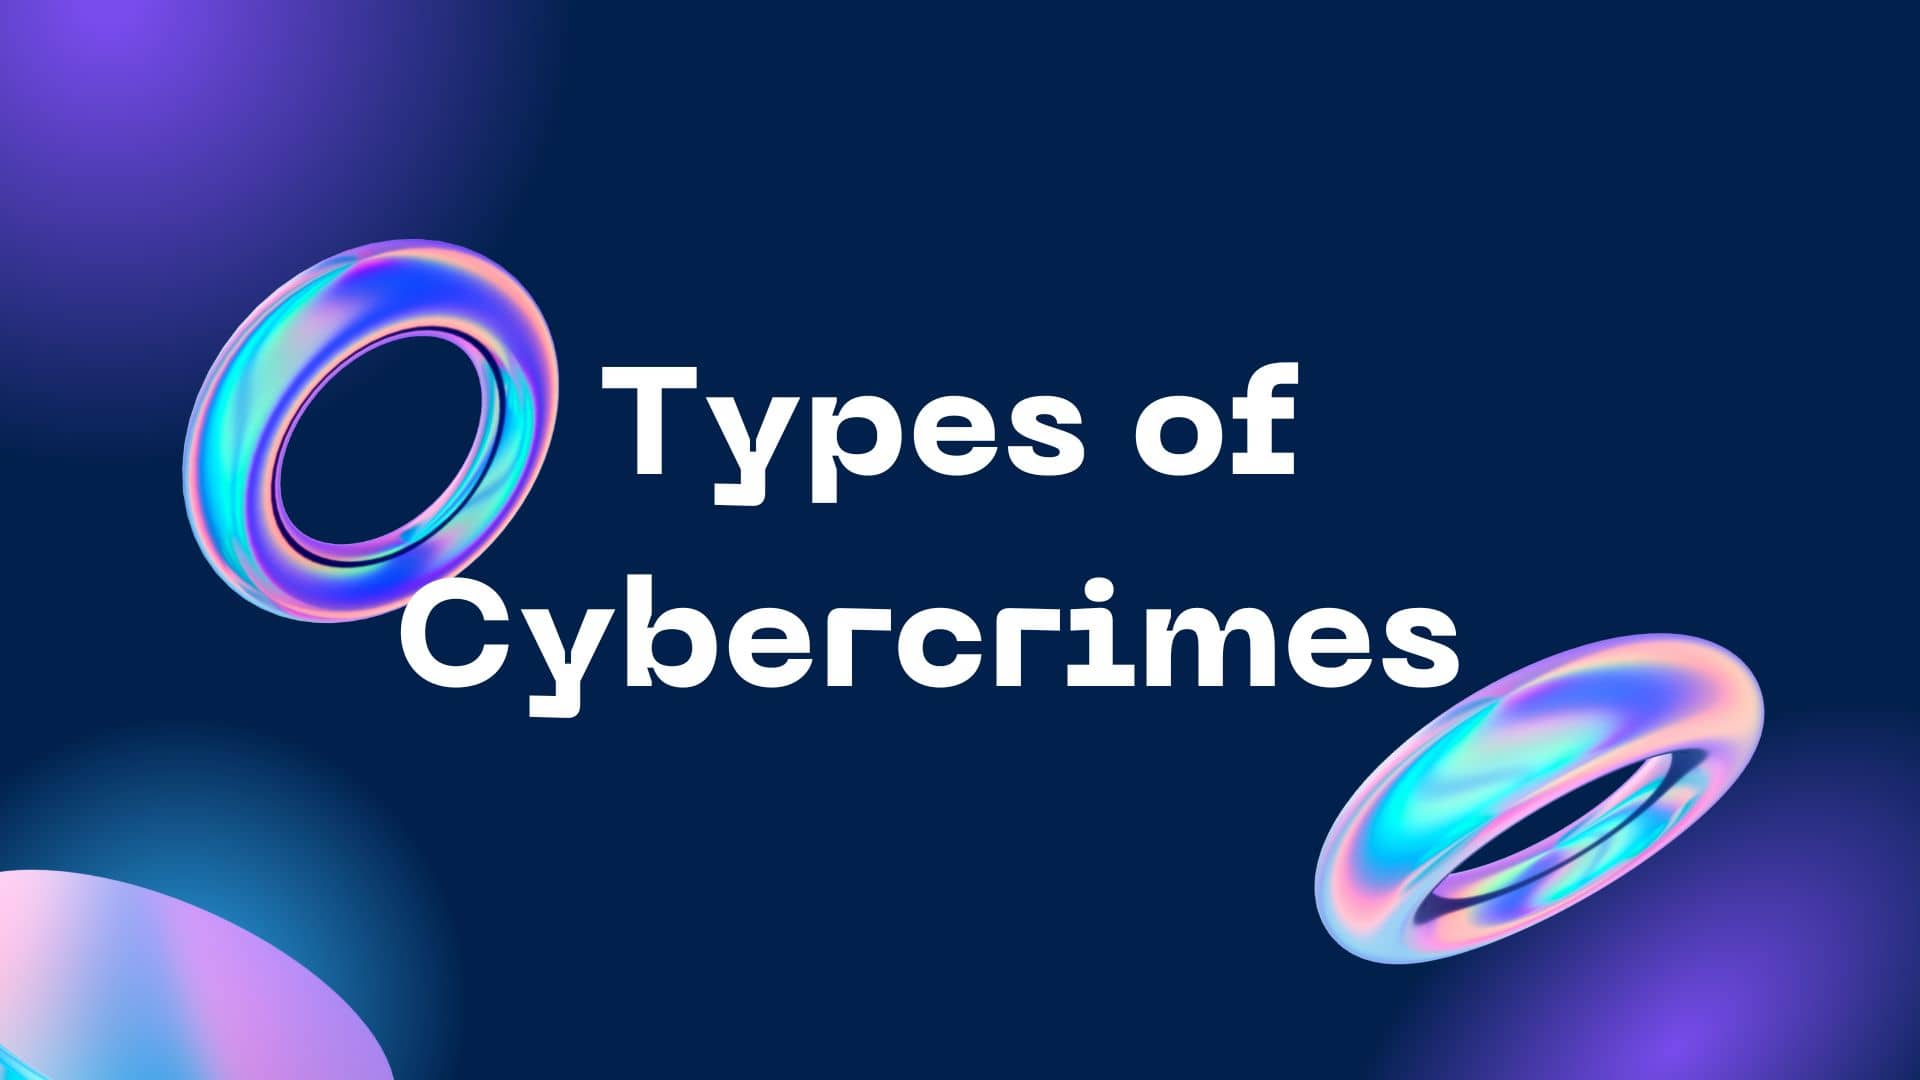 Types of Cybercrimes